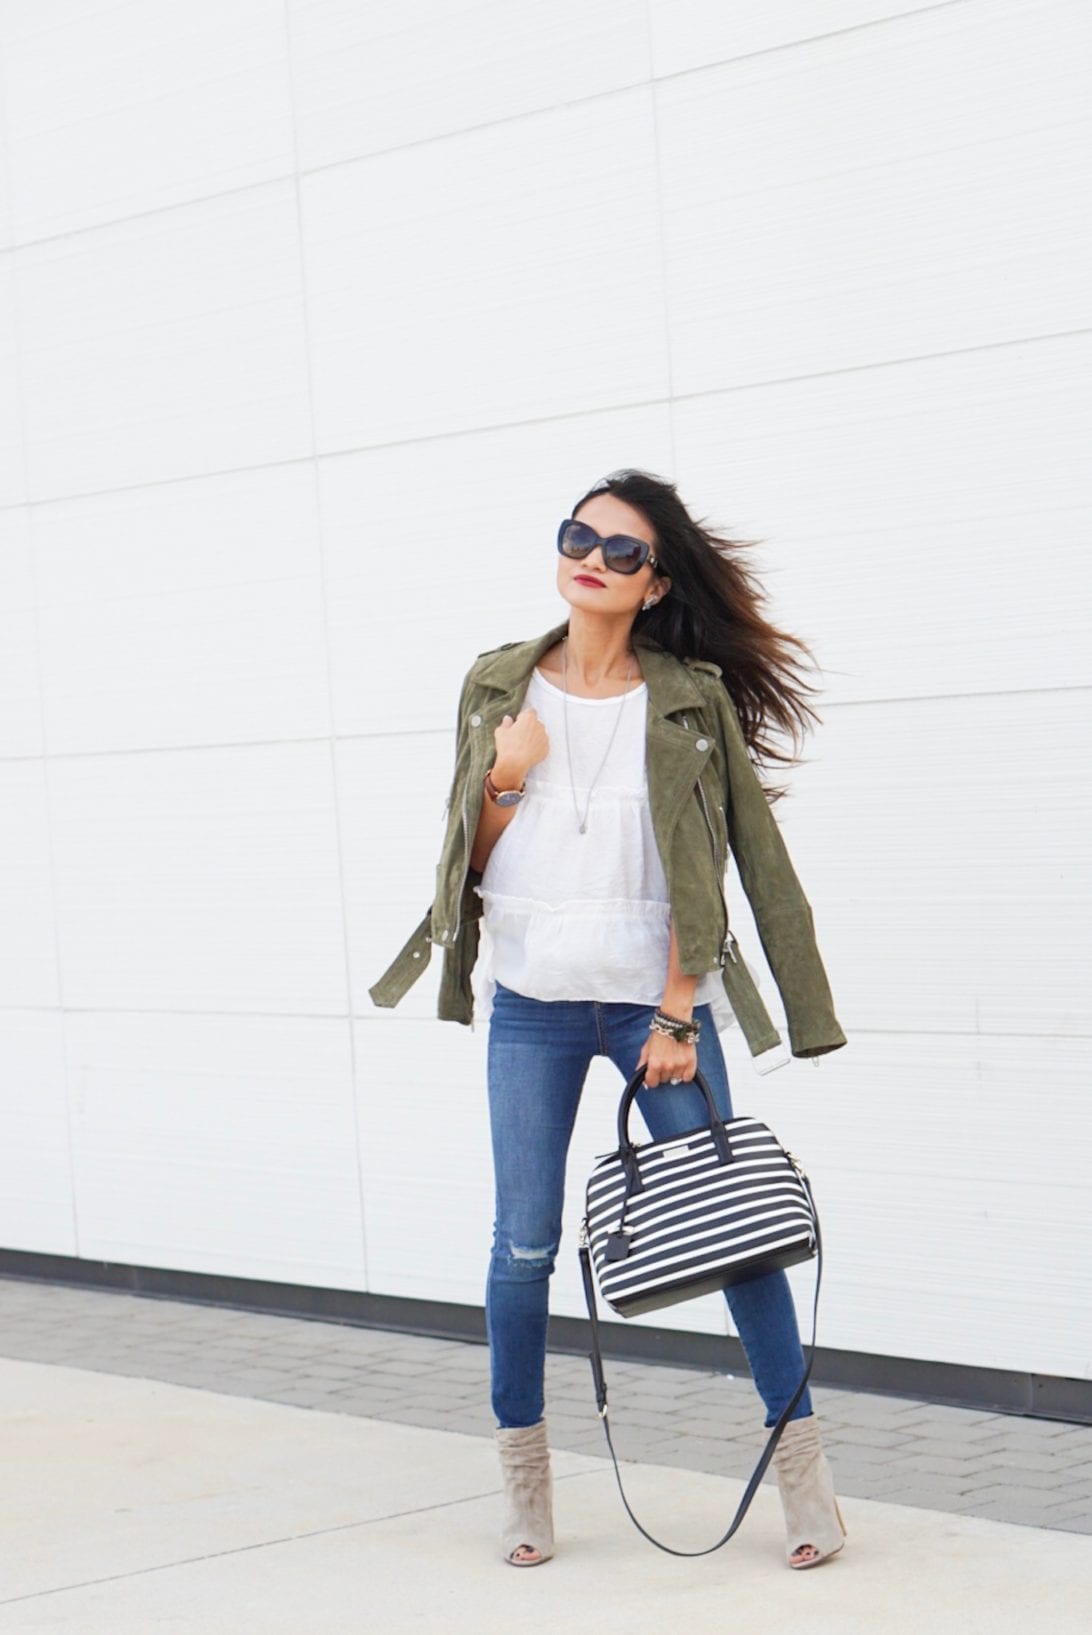 blank NYC, suede jacket, olive jacket, peplum top, Kate spade purse, skinny jeans, fall outfit, Versace sunglasses, open toe booties, NYC, NYFW, NYFW schedule 